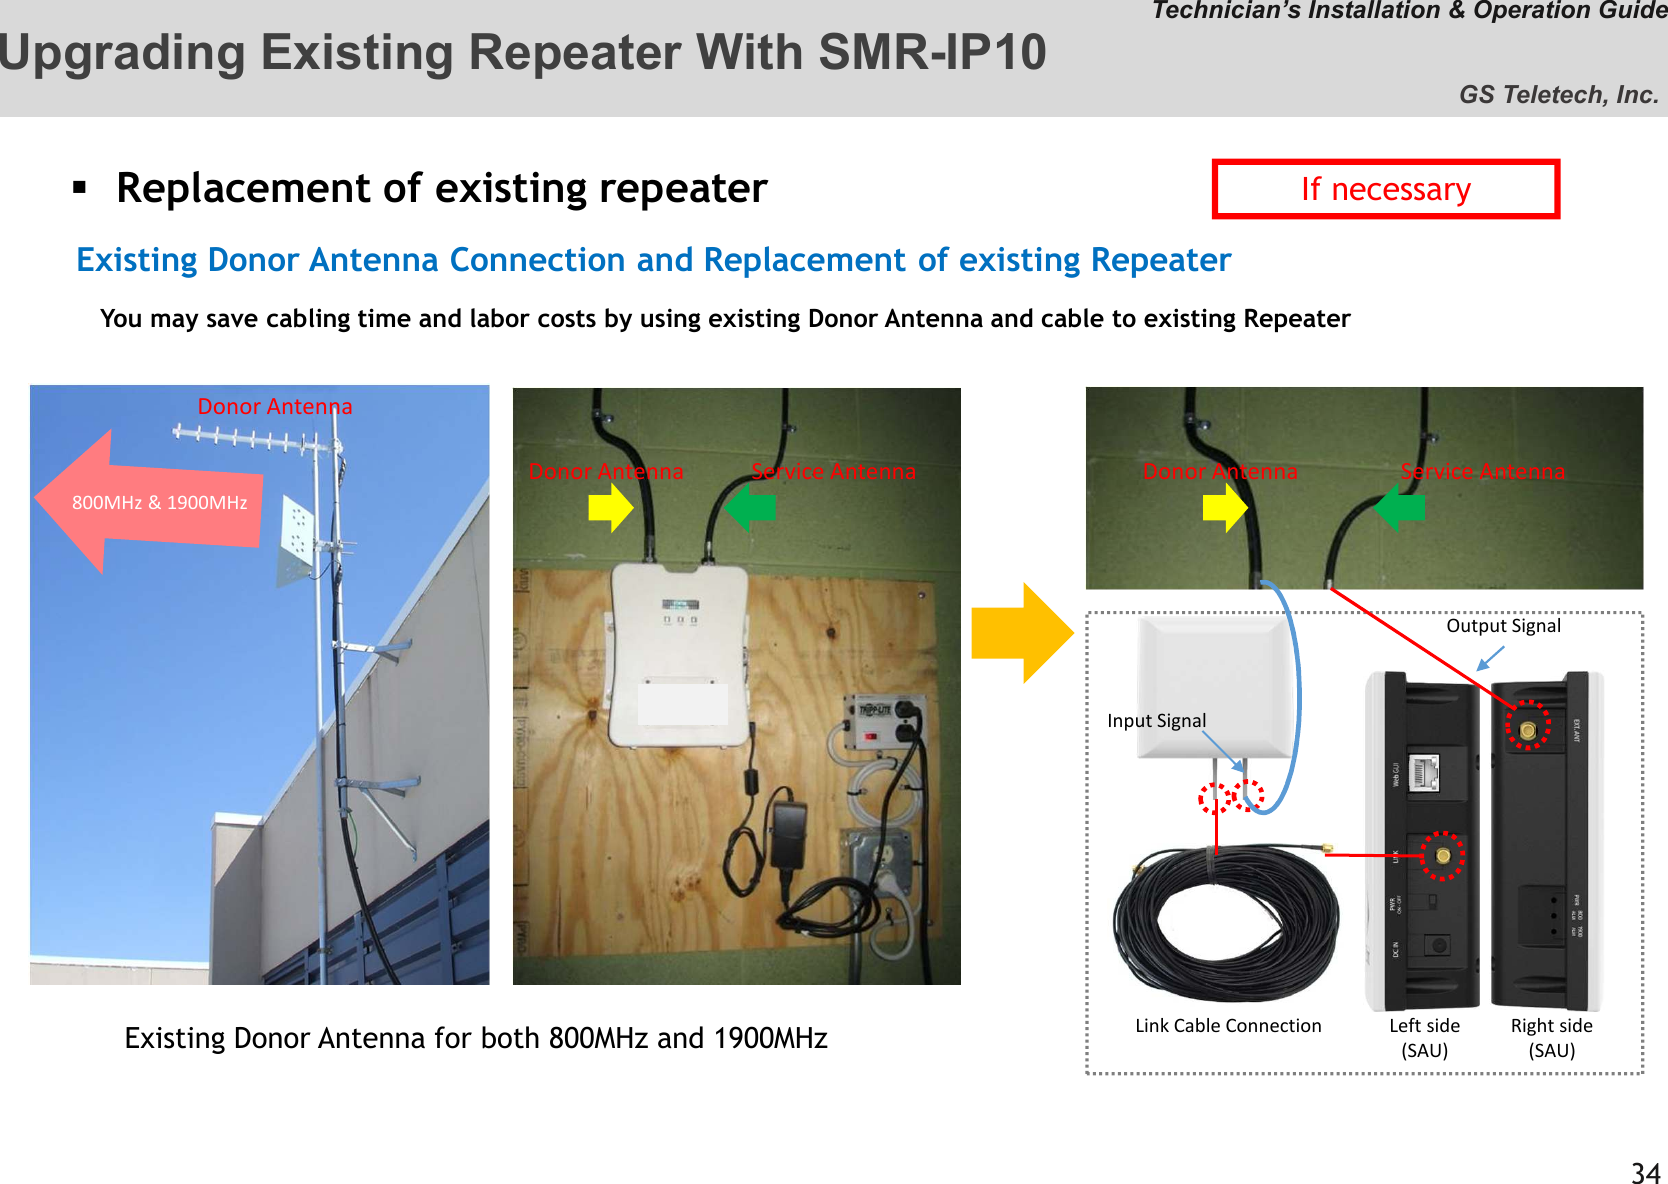 You may save cabling time and labor costs by using existing Donor Antenna and cable to existing Repeater &quot;G,-Technician’s Installation &amp; Operation GuideExisting Donor Antenna Connection and Replacement of existing RepeaterGS Teletech, Inc. Upgrading Existing Repeater With SMR-IP10Replacement of existing repeaterFI/&quot; 6?9@&quot;=?9@800MHz &amp; 1900MHzDonor Antenna Service Antenna Donor Antenna Service AntennaDonor AntennaLeft side(SAU)Right side(SAU)Link Cable ConnectionInput SignalOutput Signal